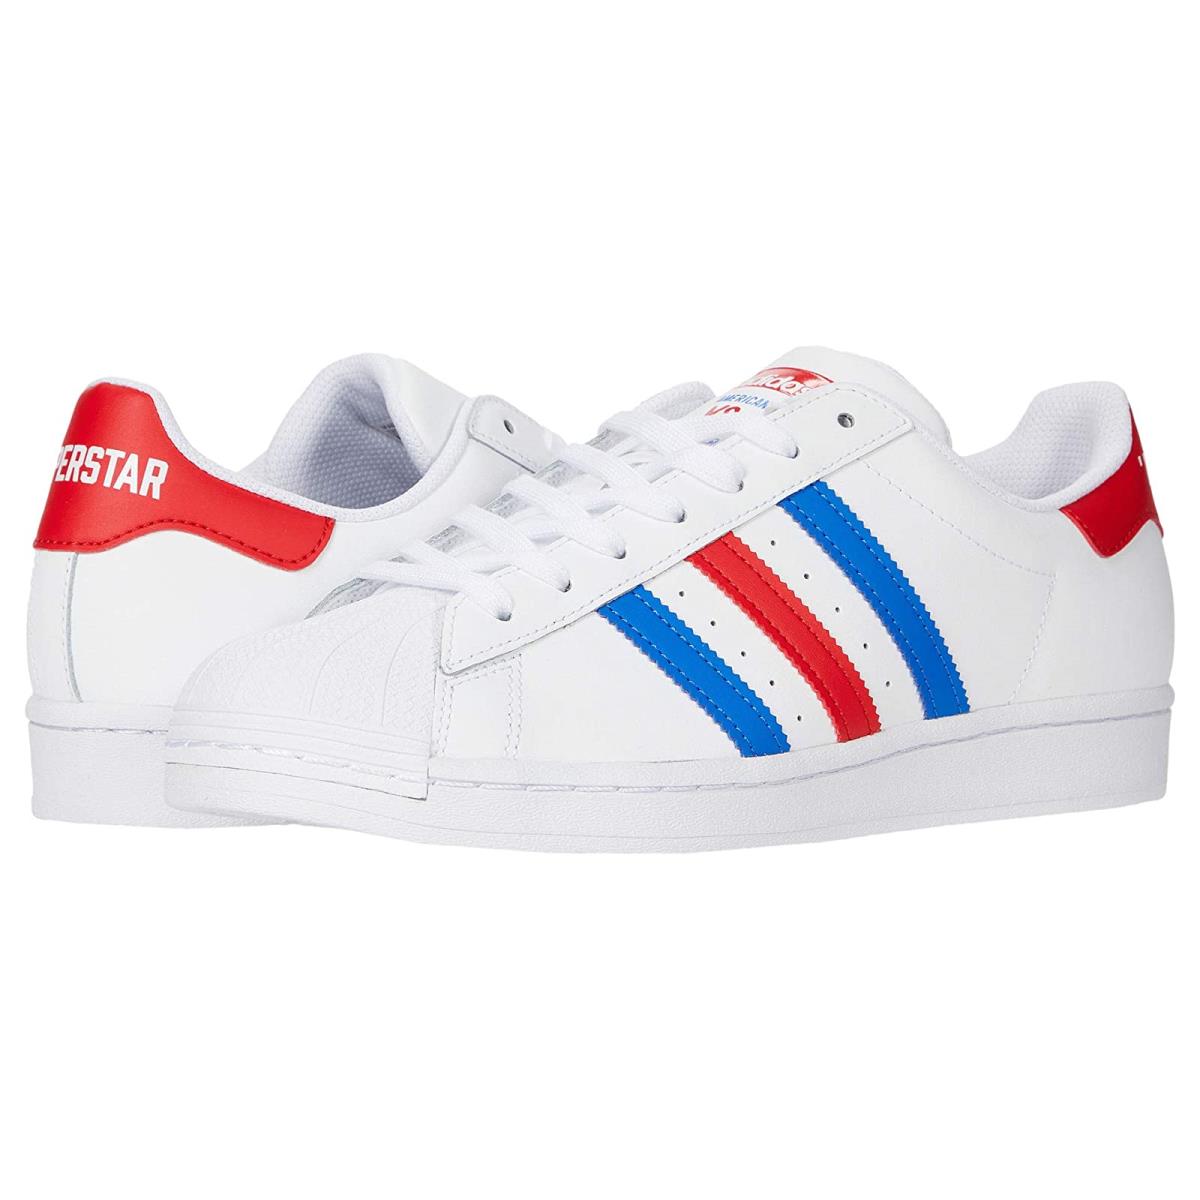 Man`s Sneakers Athletic Shoes Adidas Originals Superstar White/Blue/Team Red